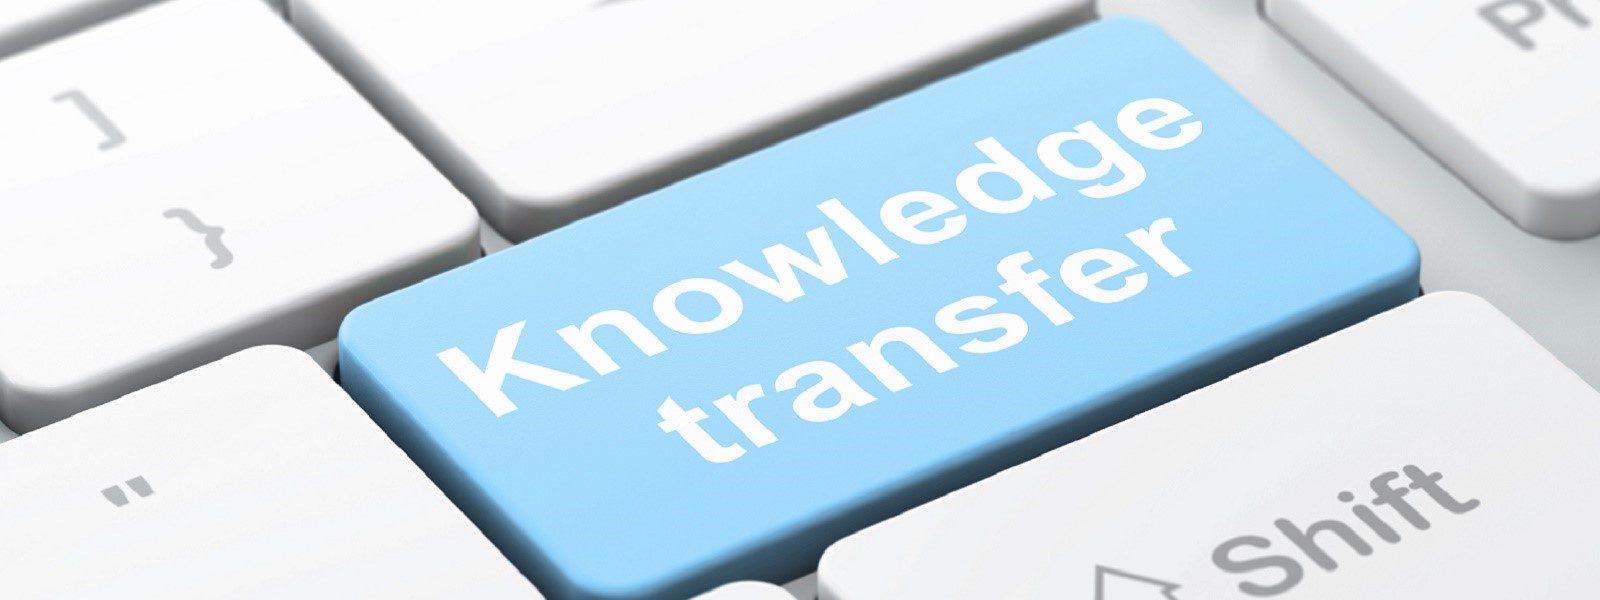 Computer button displaying words 'knowledge transfer'